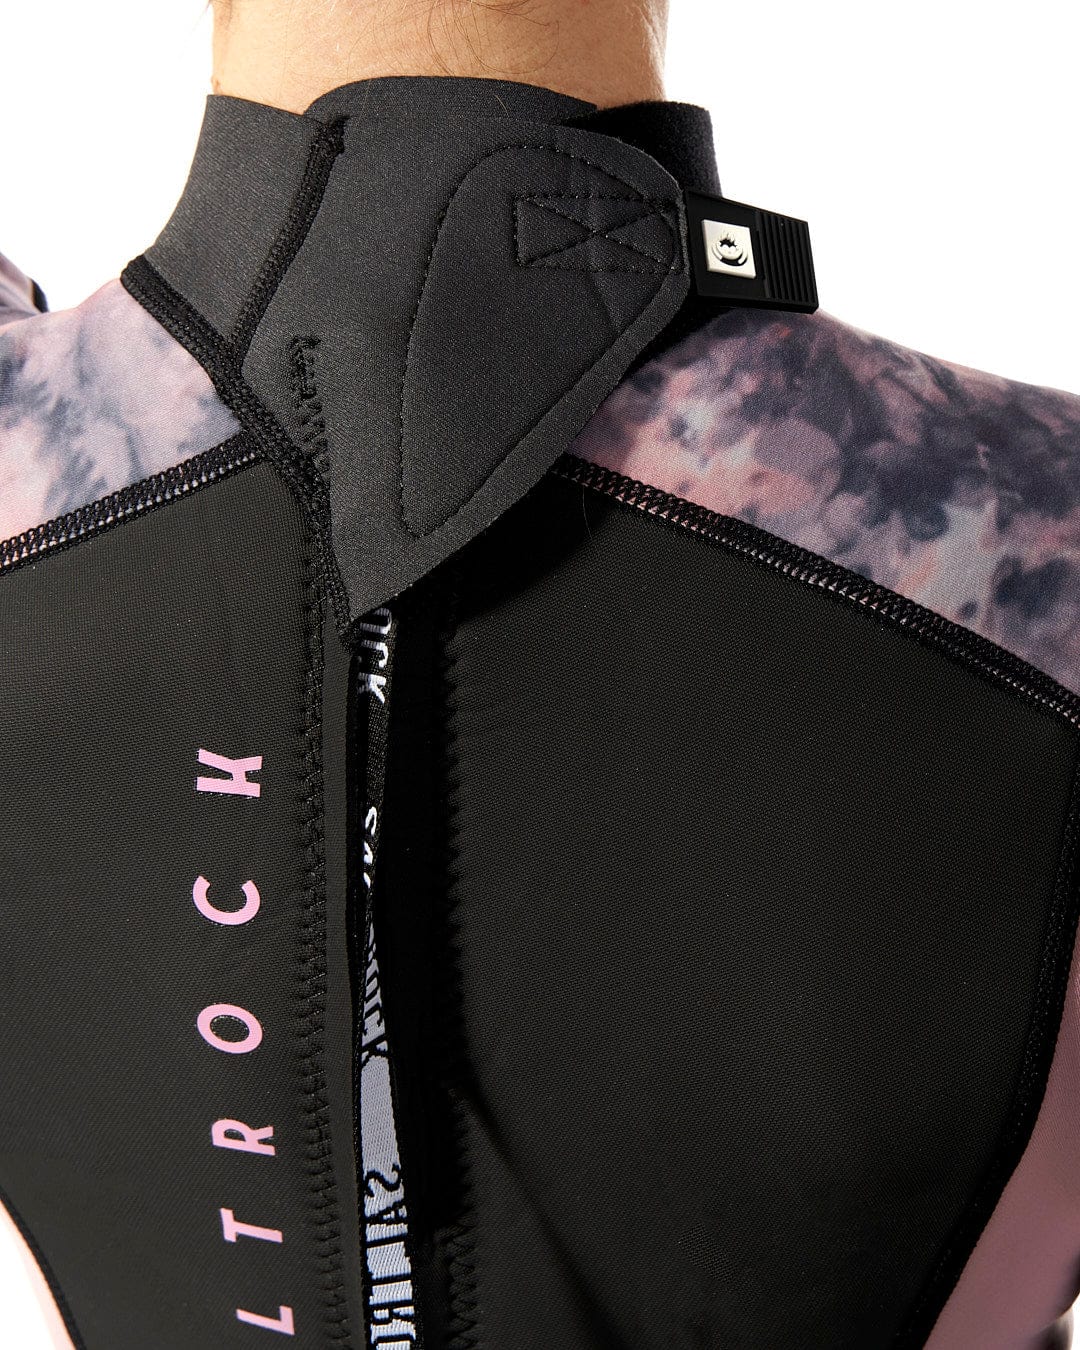 The back view of a woman wearing a Saltrock Vision - Womens 3/2 Back Zip Wetsuit in Black/Pink.